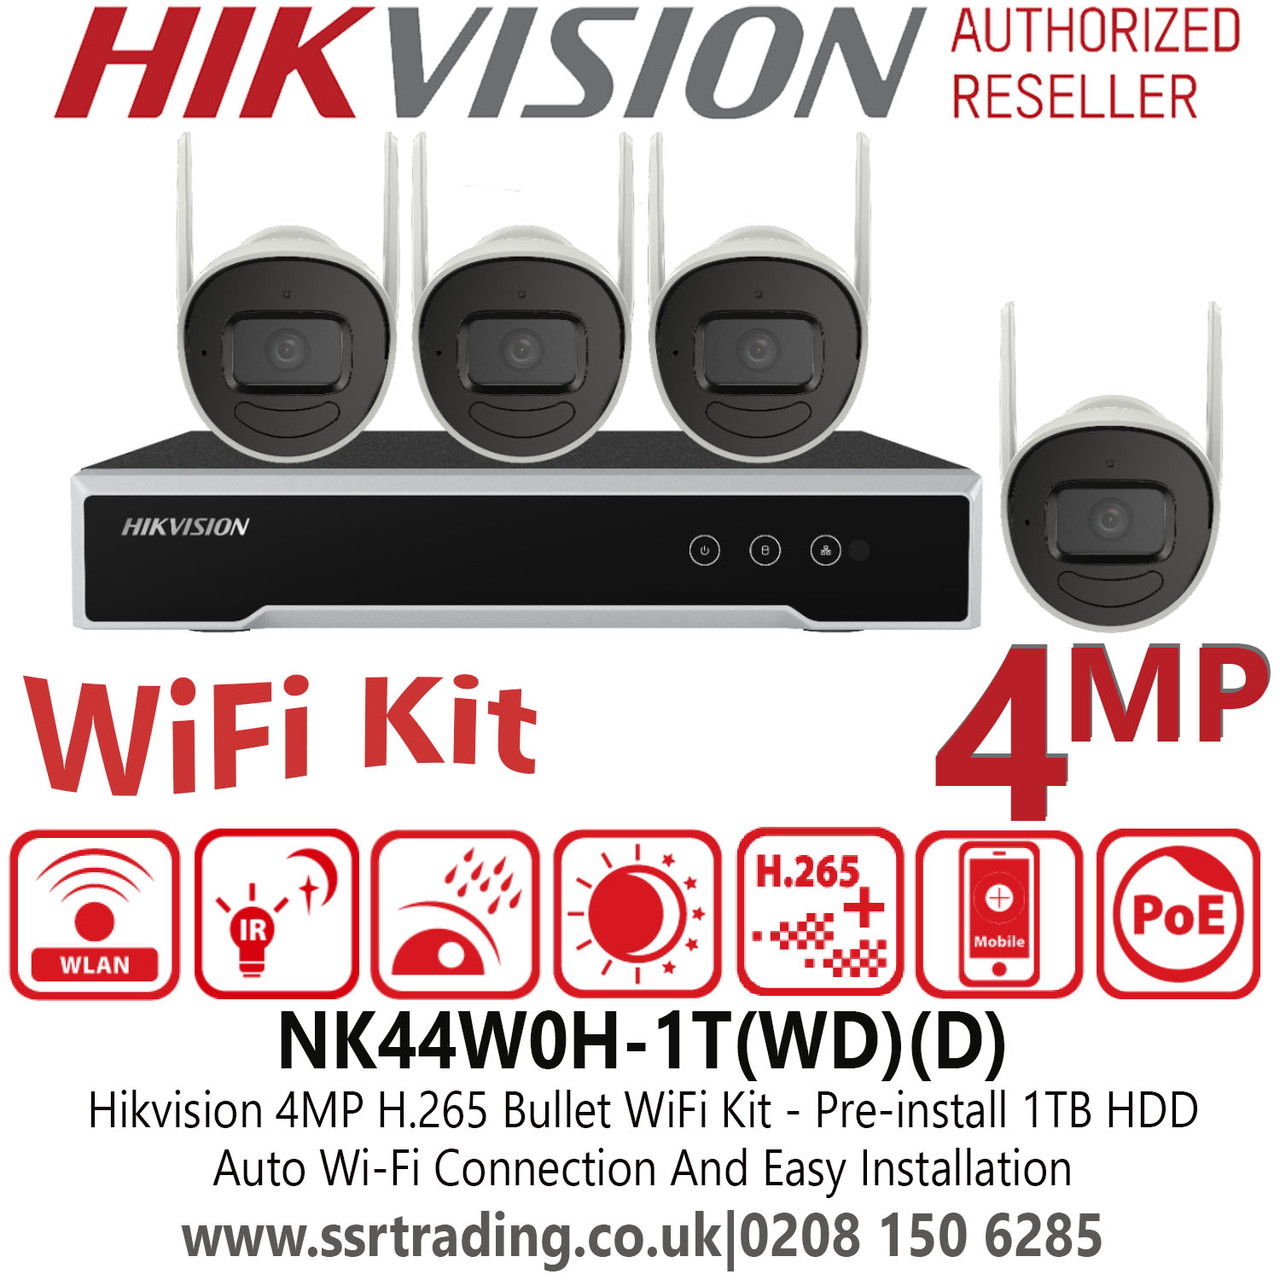 Hikvision 4MP H.265 Bullet WiFi Kit with 1TB Hard Drive, 4MP Bullet Wi-Fi  Cameras with Efficient H.265 - NK44W0H-1T(WD)(D)